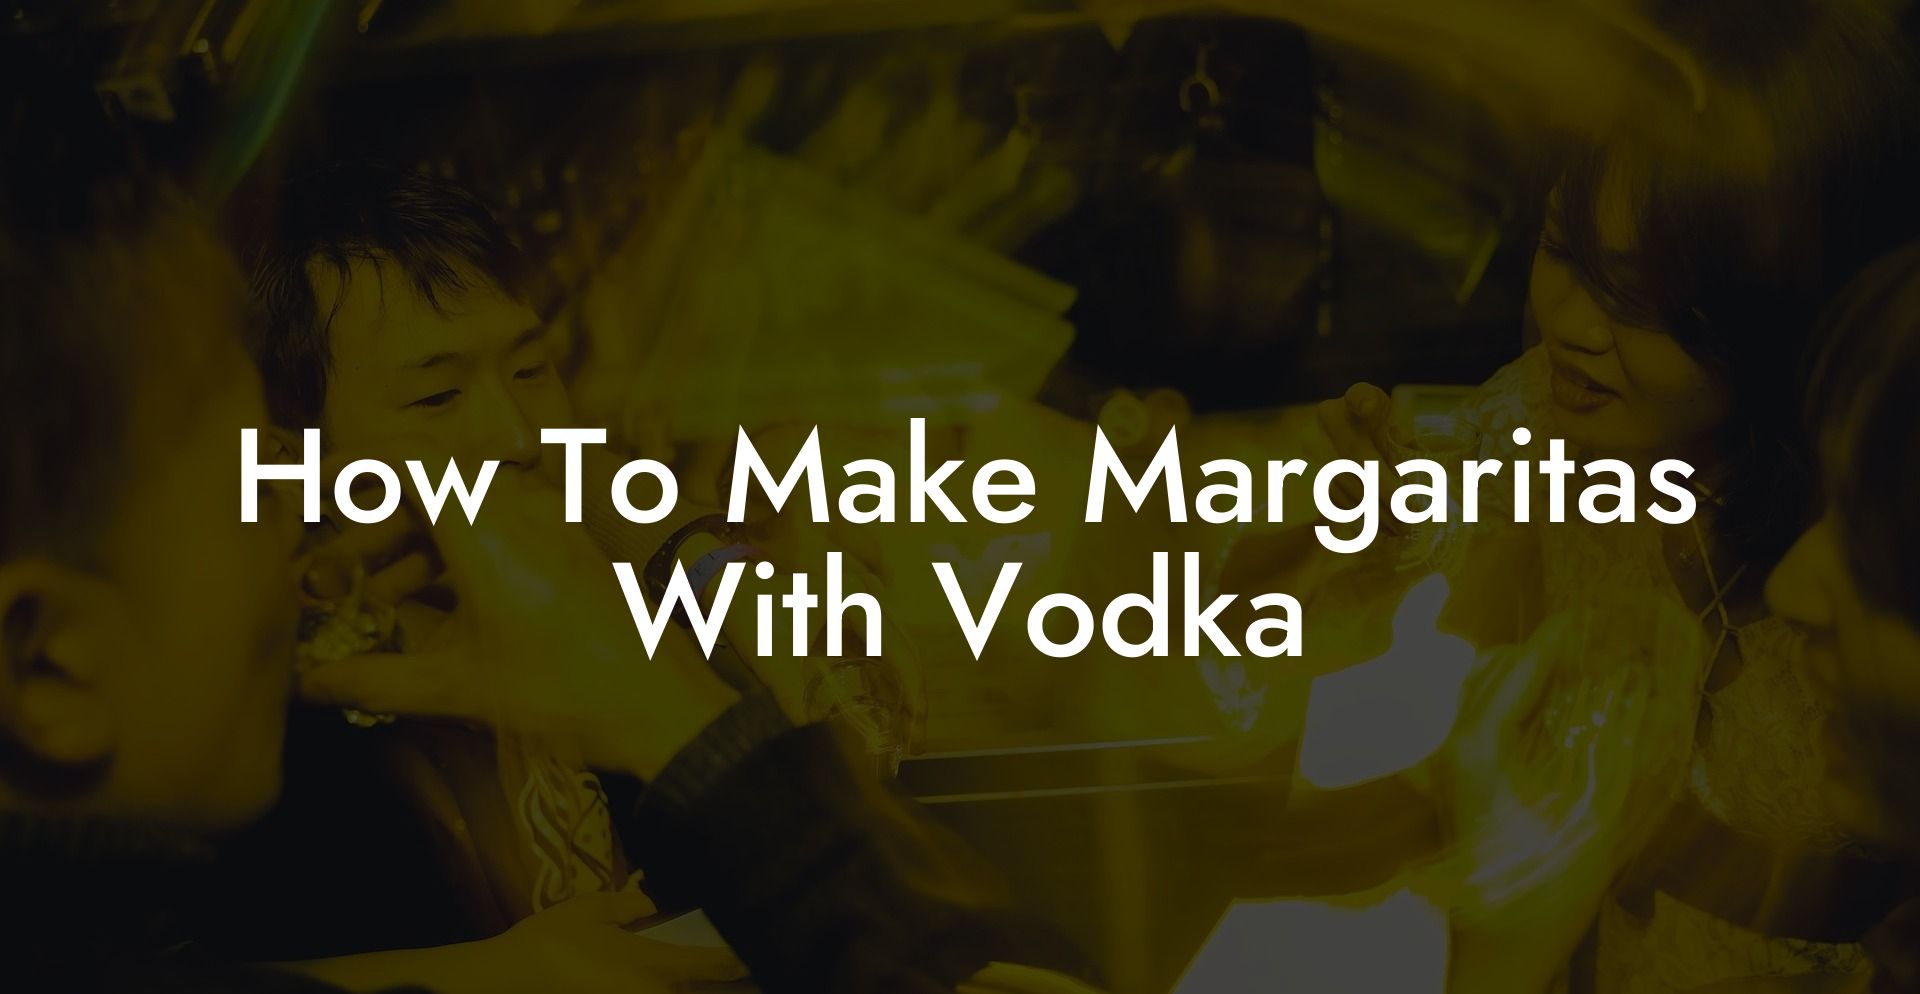 How To Make Margaritas With Vodka